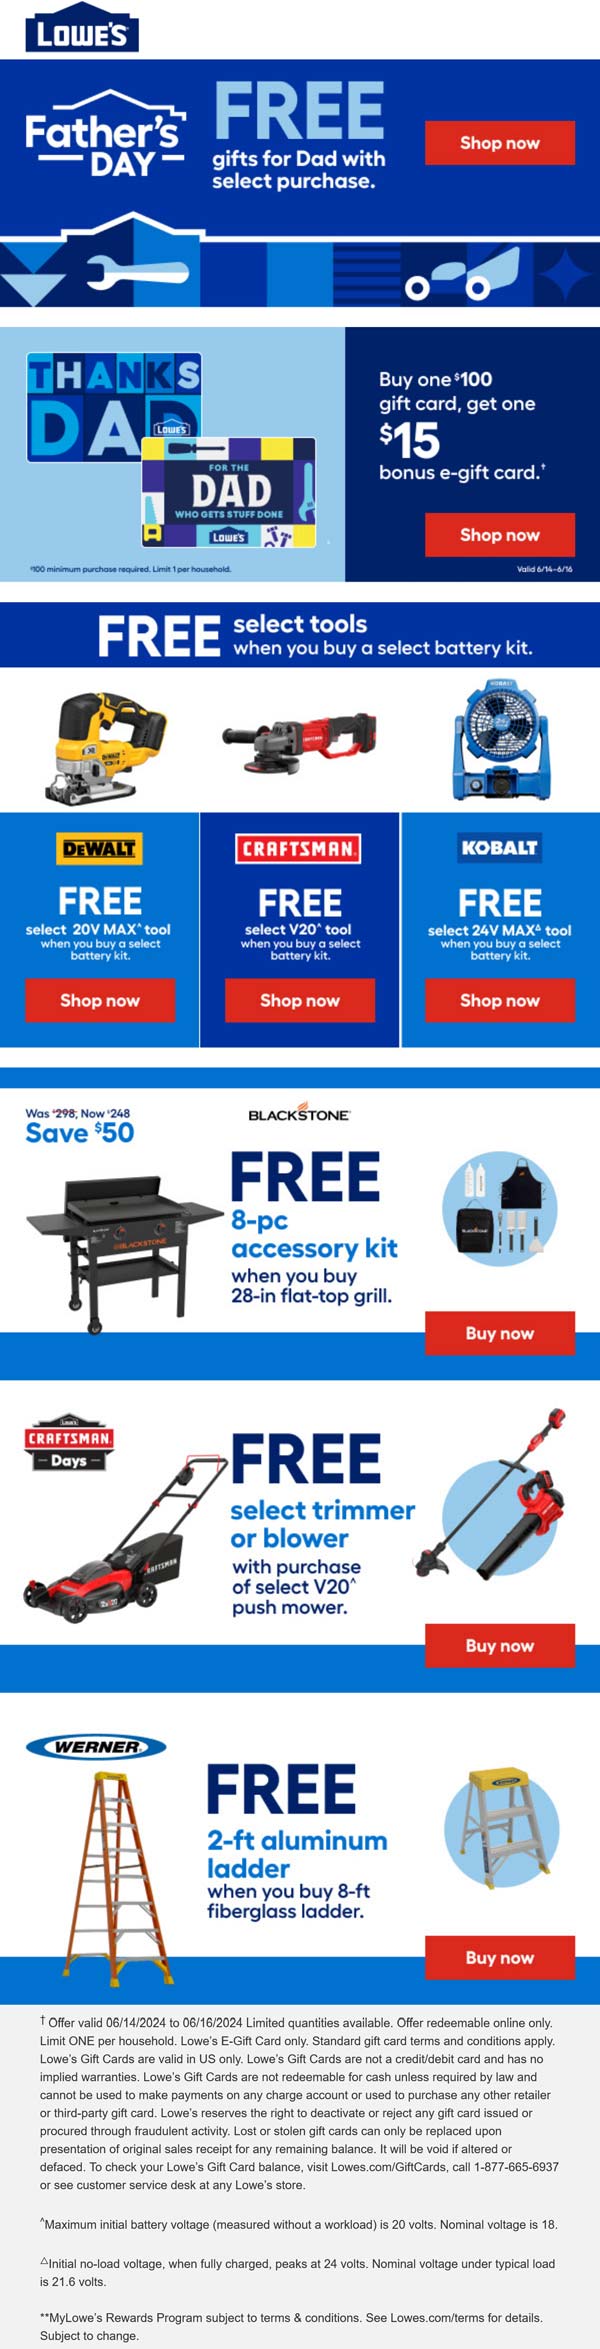 Lowes stores Coupon  Various free stuff for Dad with purchase at Lowes #lowes 